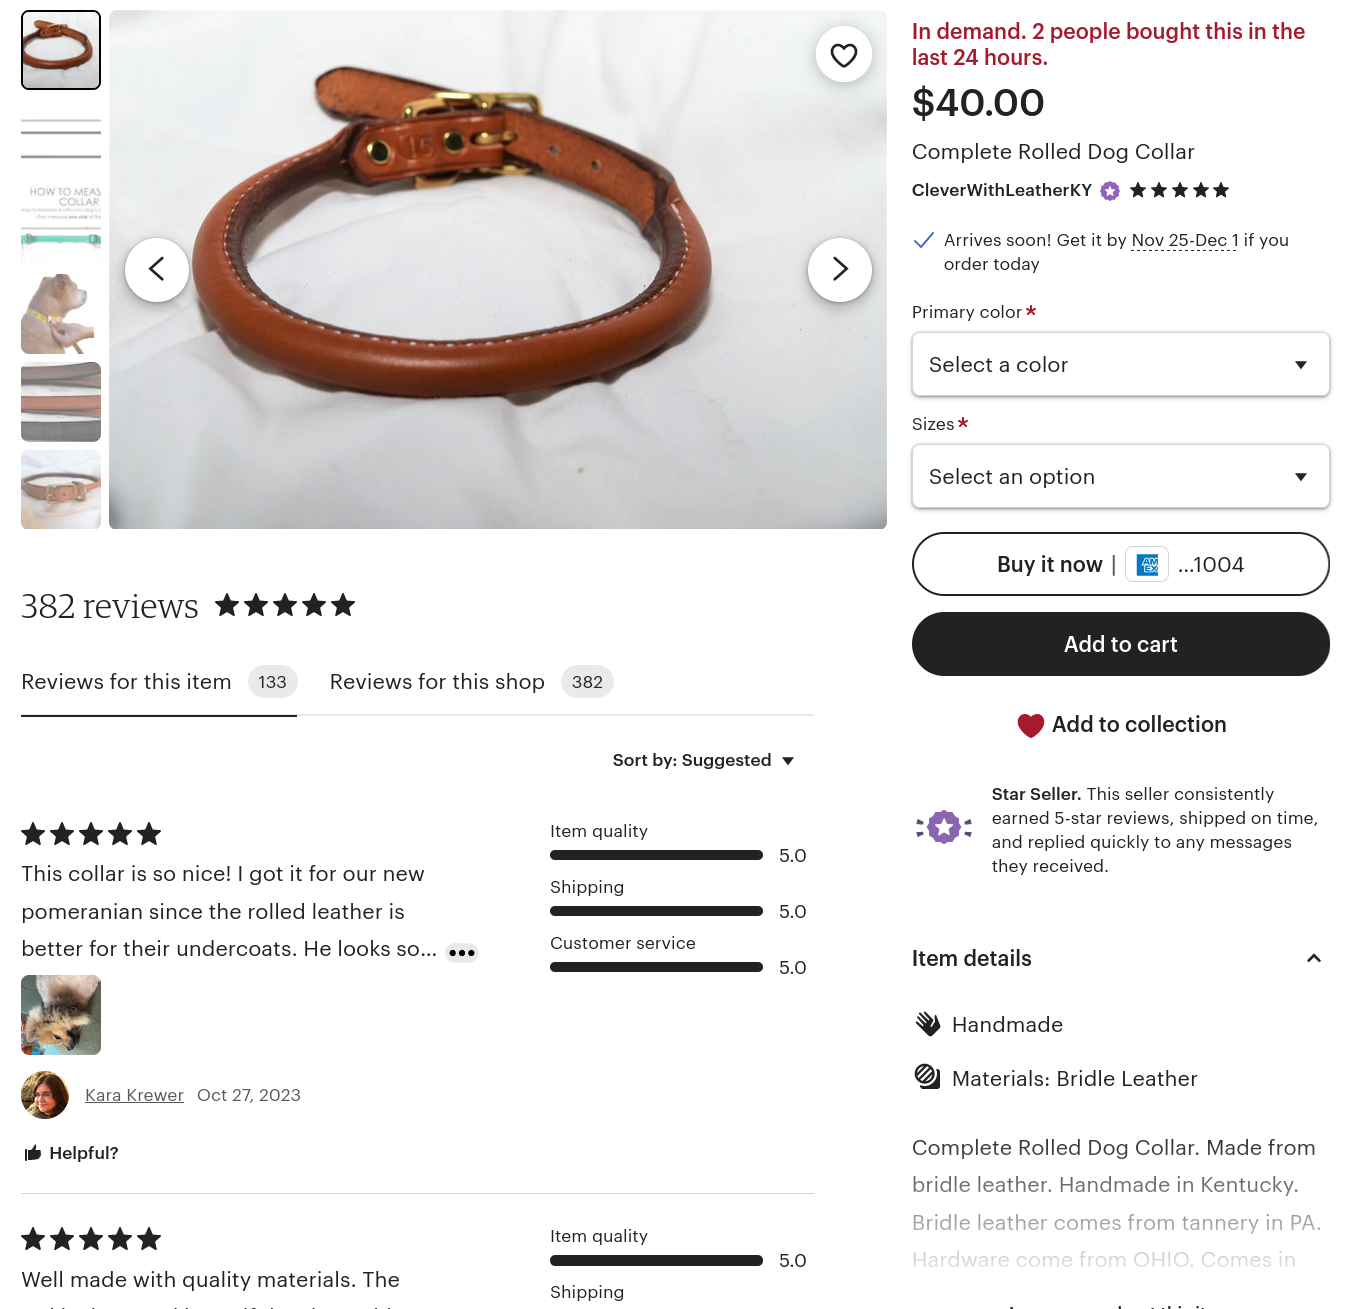 Product page for Complete Rolled Dog Collar at CleverWithLeatherKY